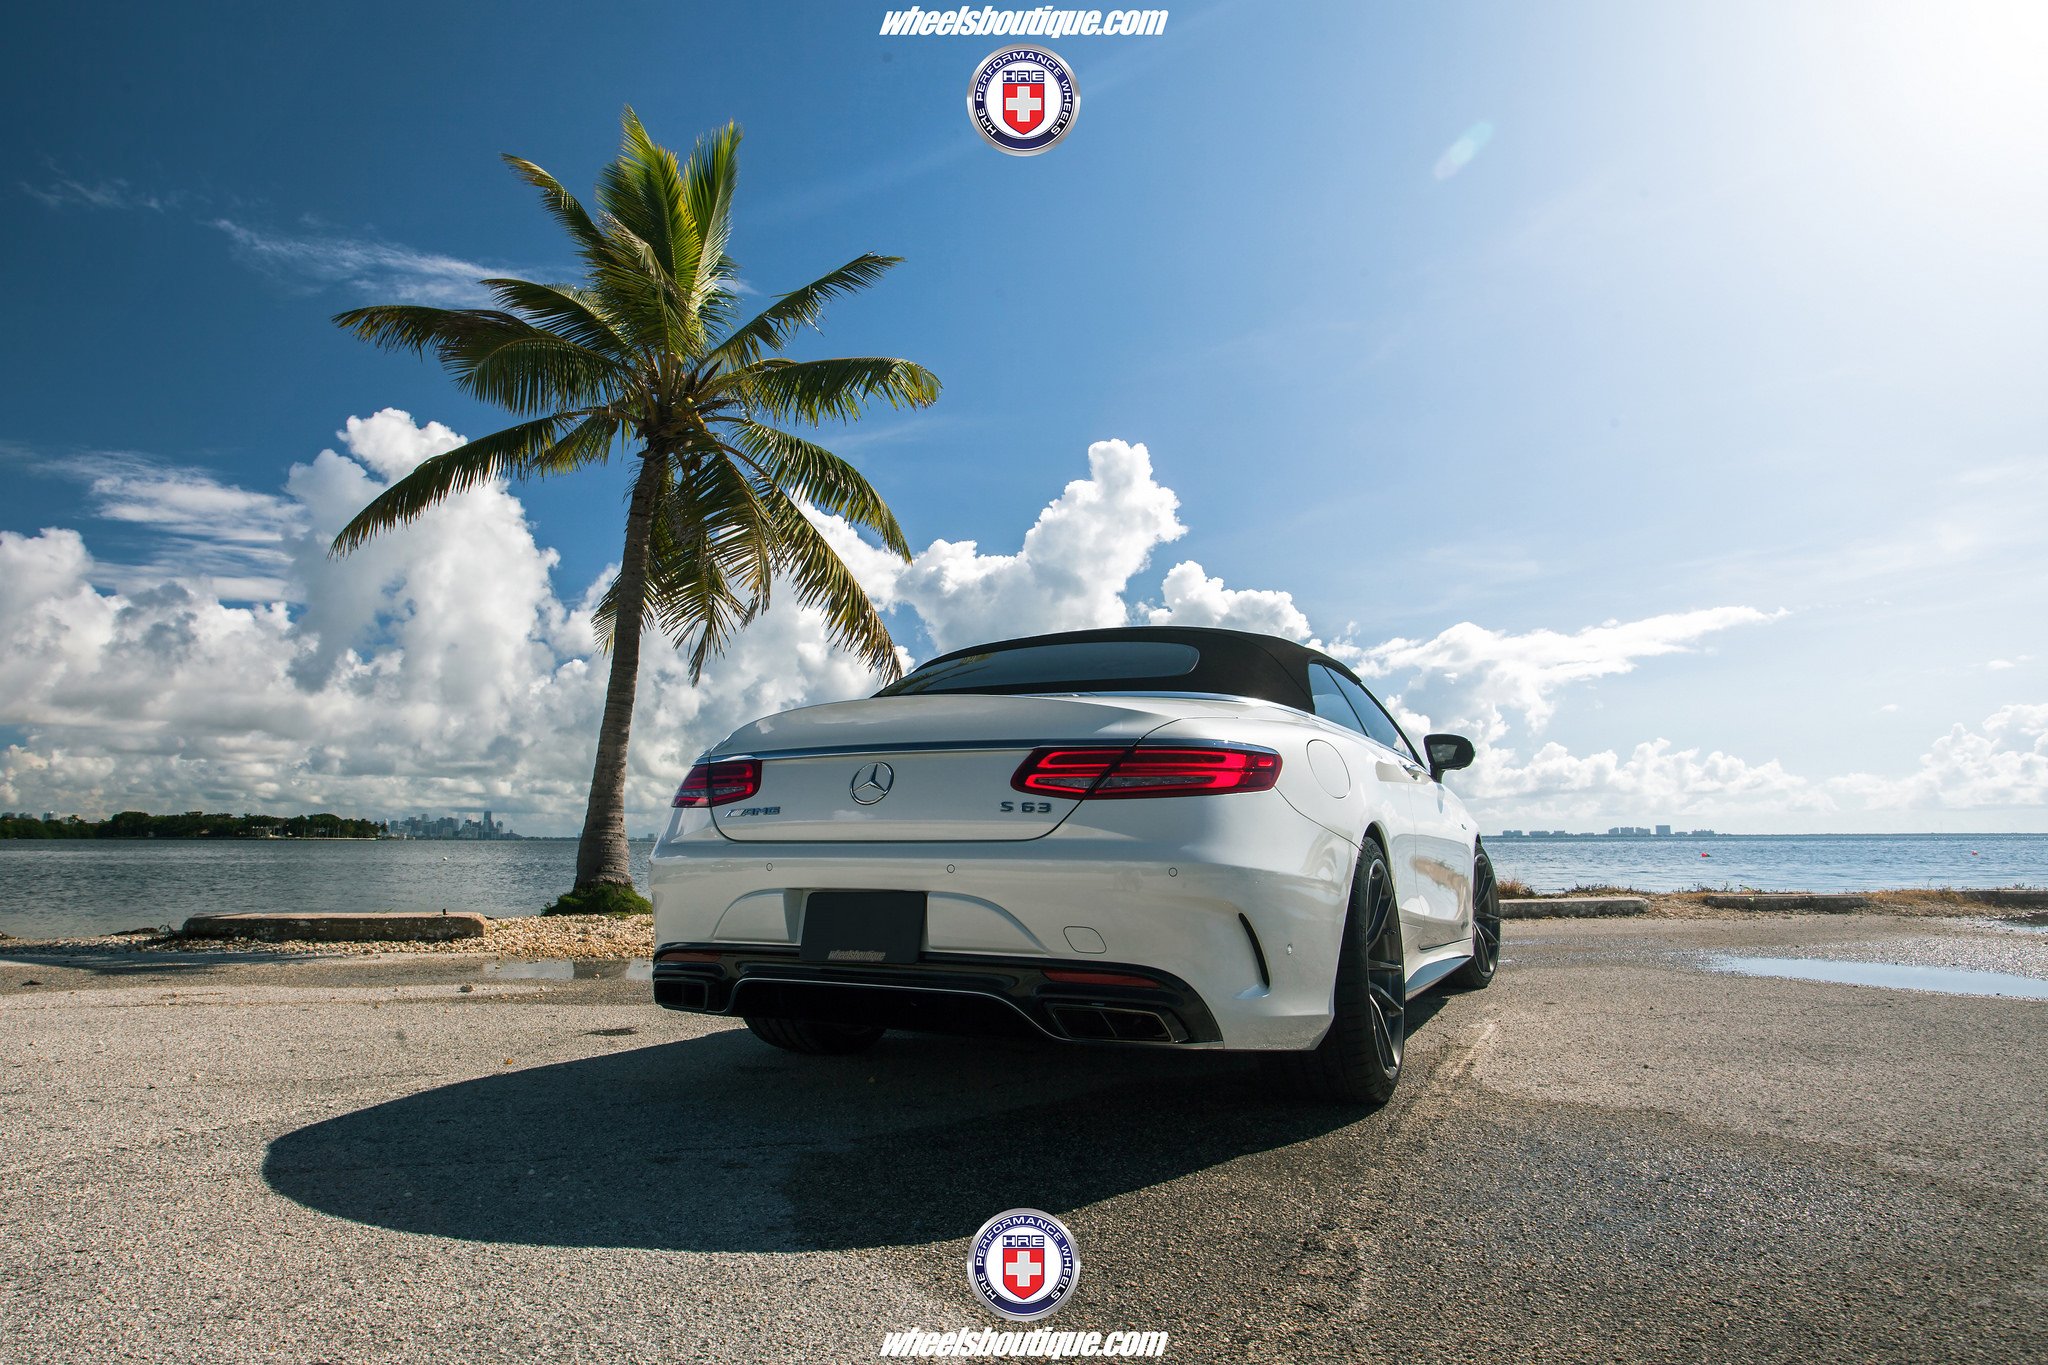 hre, Wheels, Cars, Mercedes, S63, Amg, Cabriolet, White Wallpaper